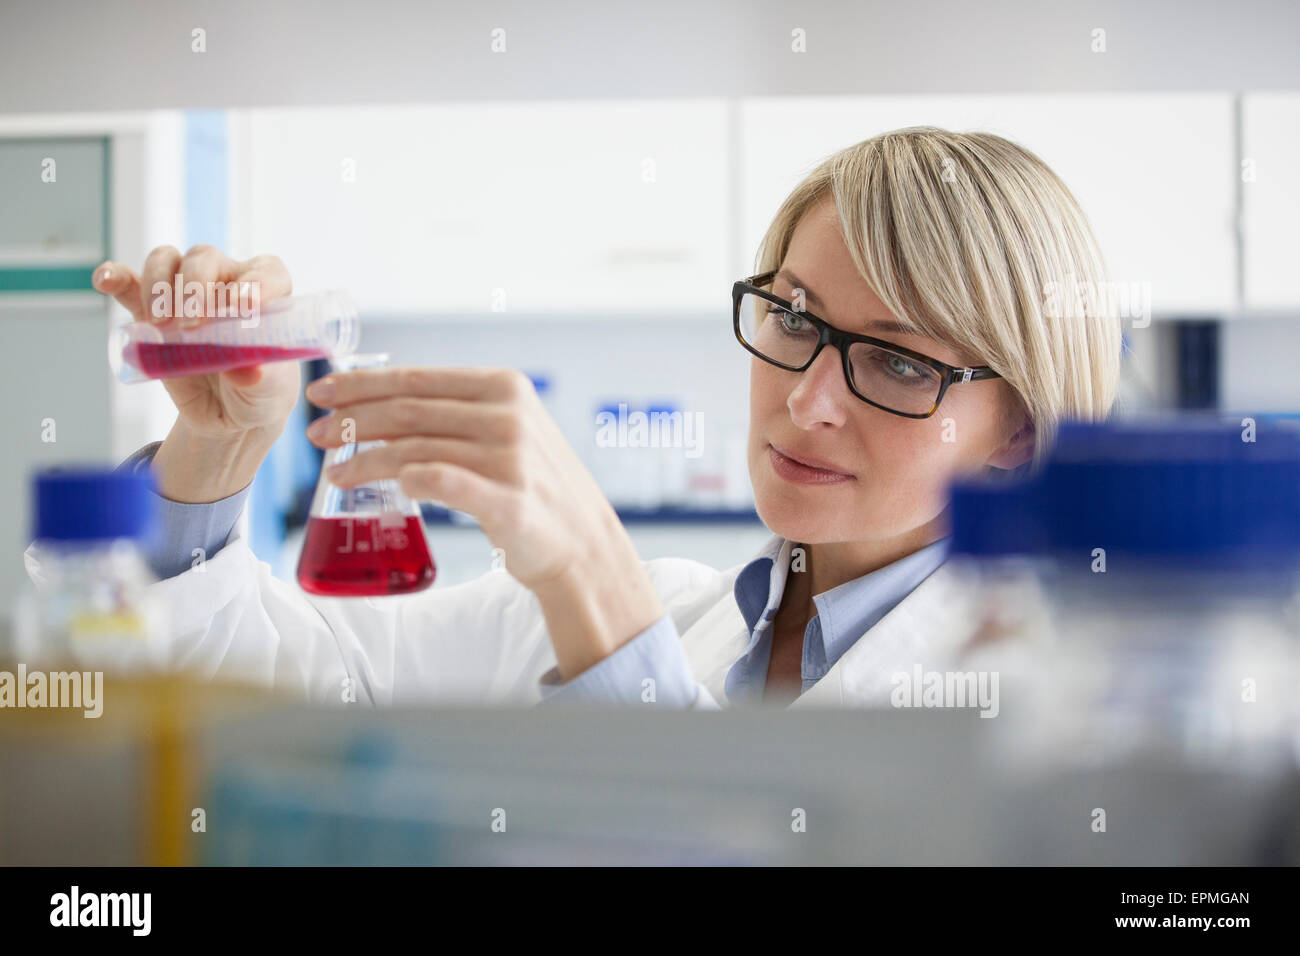 Scientist pouring liquid in Erlenmeyer flask Stock Photo